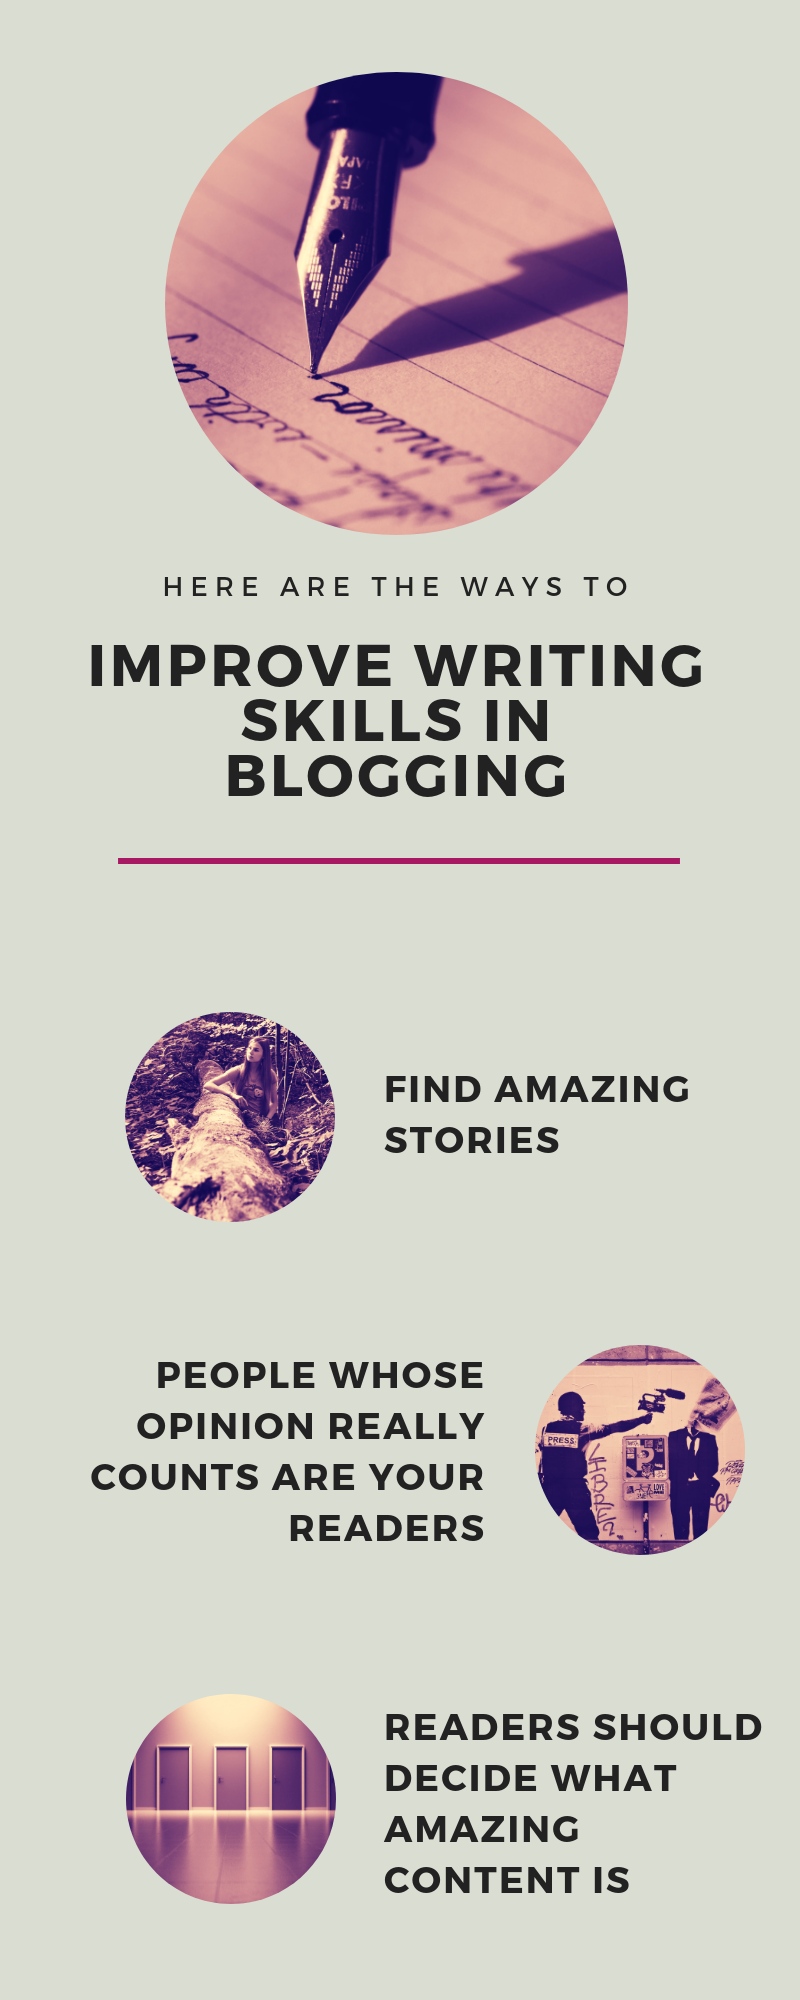 Top writing tips (from around the web) to create kick ass content